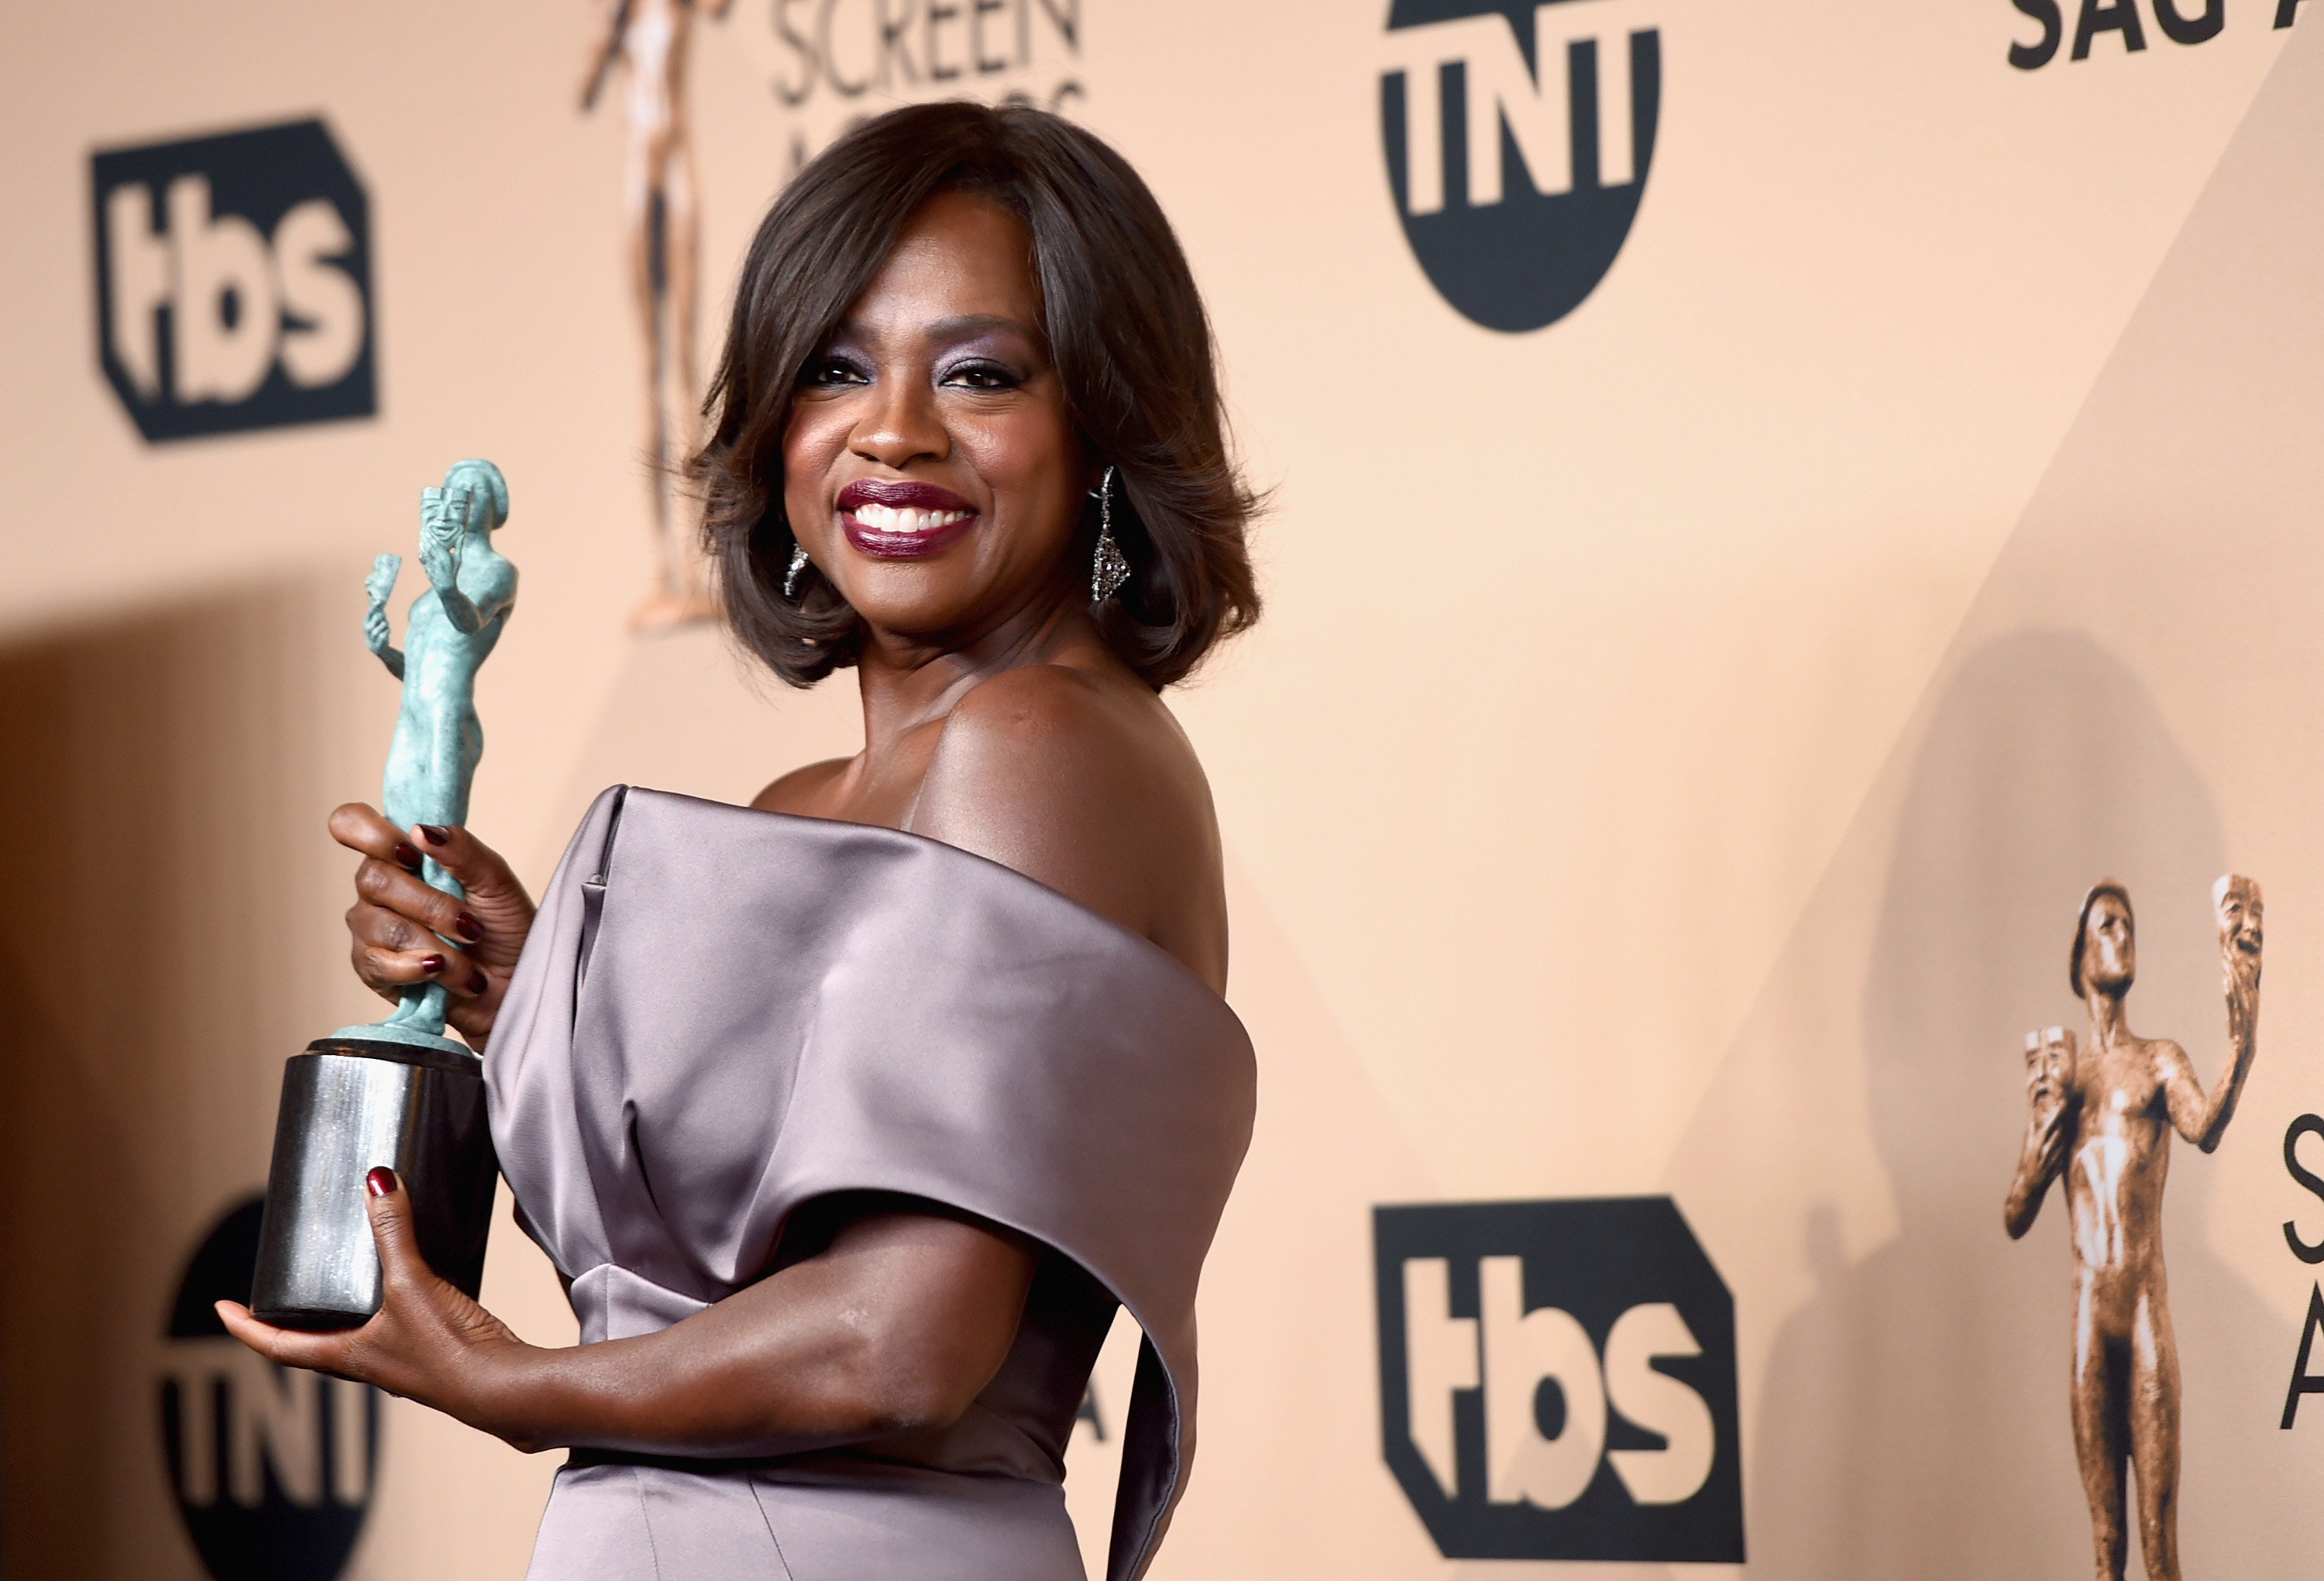 LOS ANGELES, CA - JANUARY 30:  Actress Viola Davis, winner of the Outstanding Performance by a Female Actor in a Drama Series award for 'How to Get Away with Murder,' poses in the press room during The 22nd Annual Screen Actors Guild Awards at The Shrine Auditorium on January 30, 2016 in Los Angeles, California. 25650_015  (Photo by Jason Merritt/Getty Images for Turner) (Jason Merritt&mdash;Turner/Getty Images)